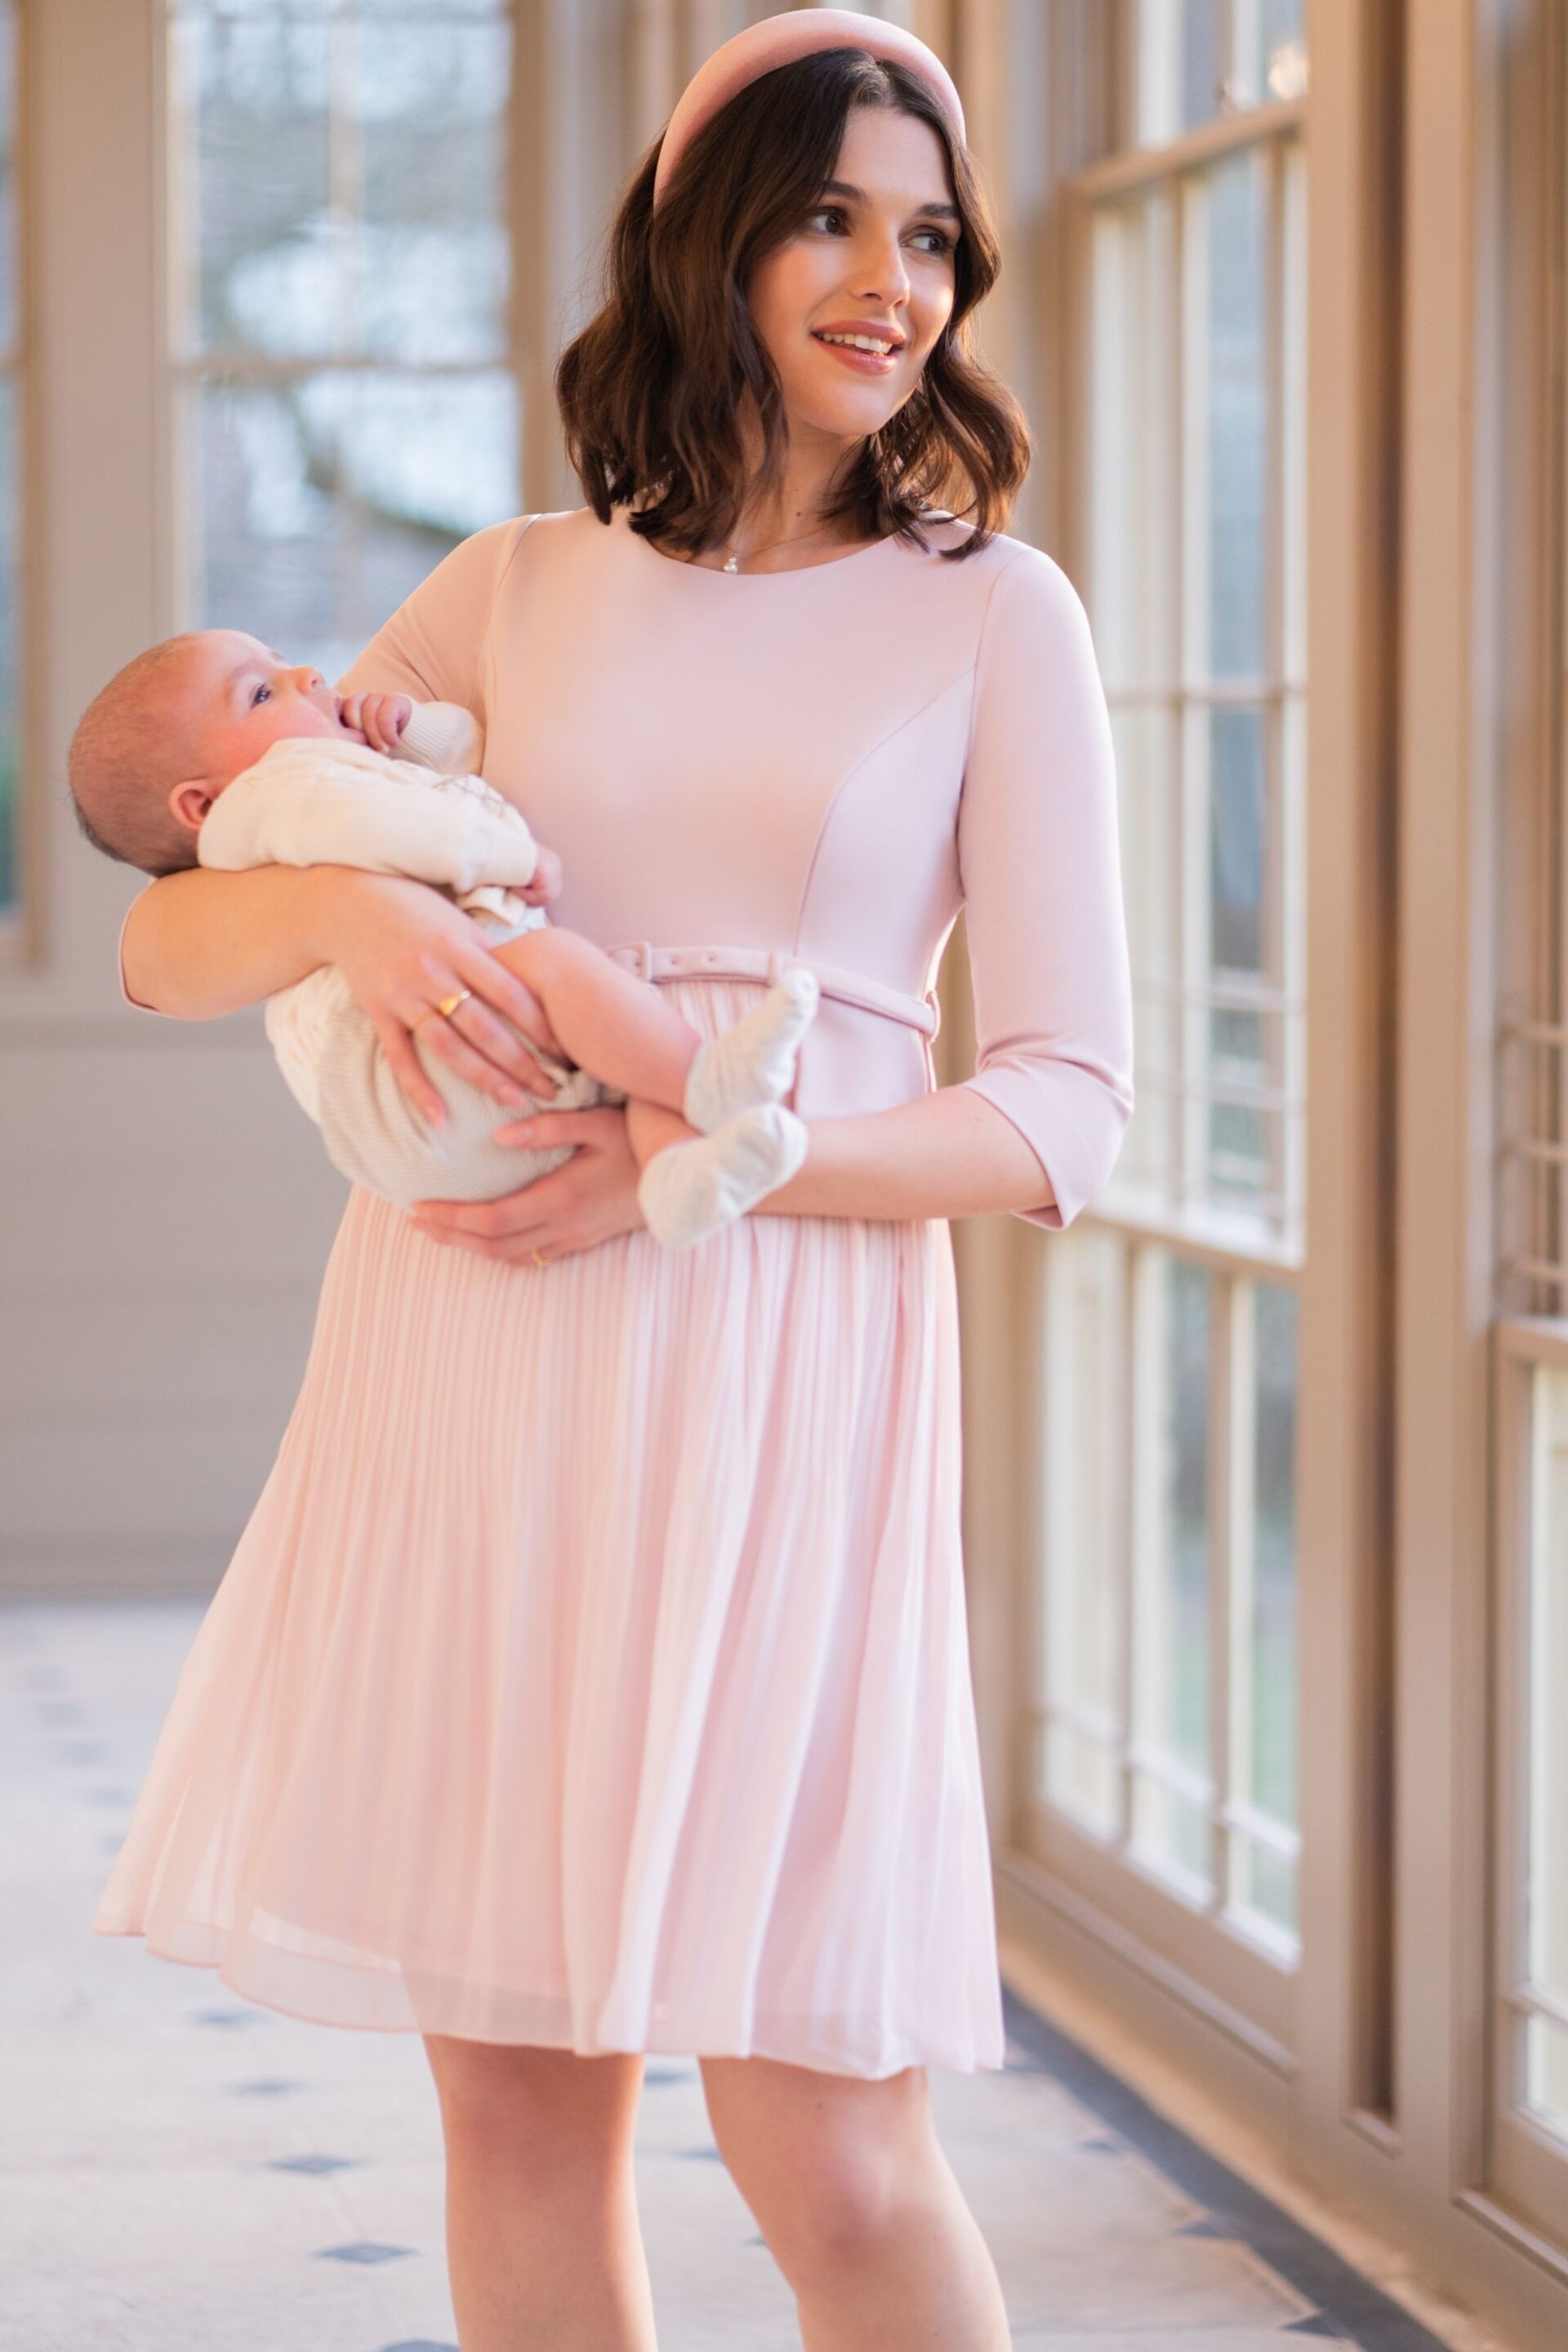 Seraphine Pink Pleated Maternity Dress - Image 2 of 8